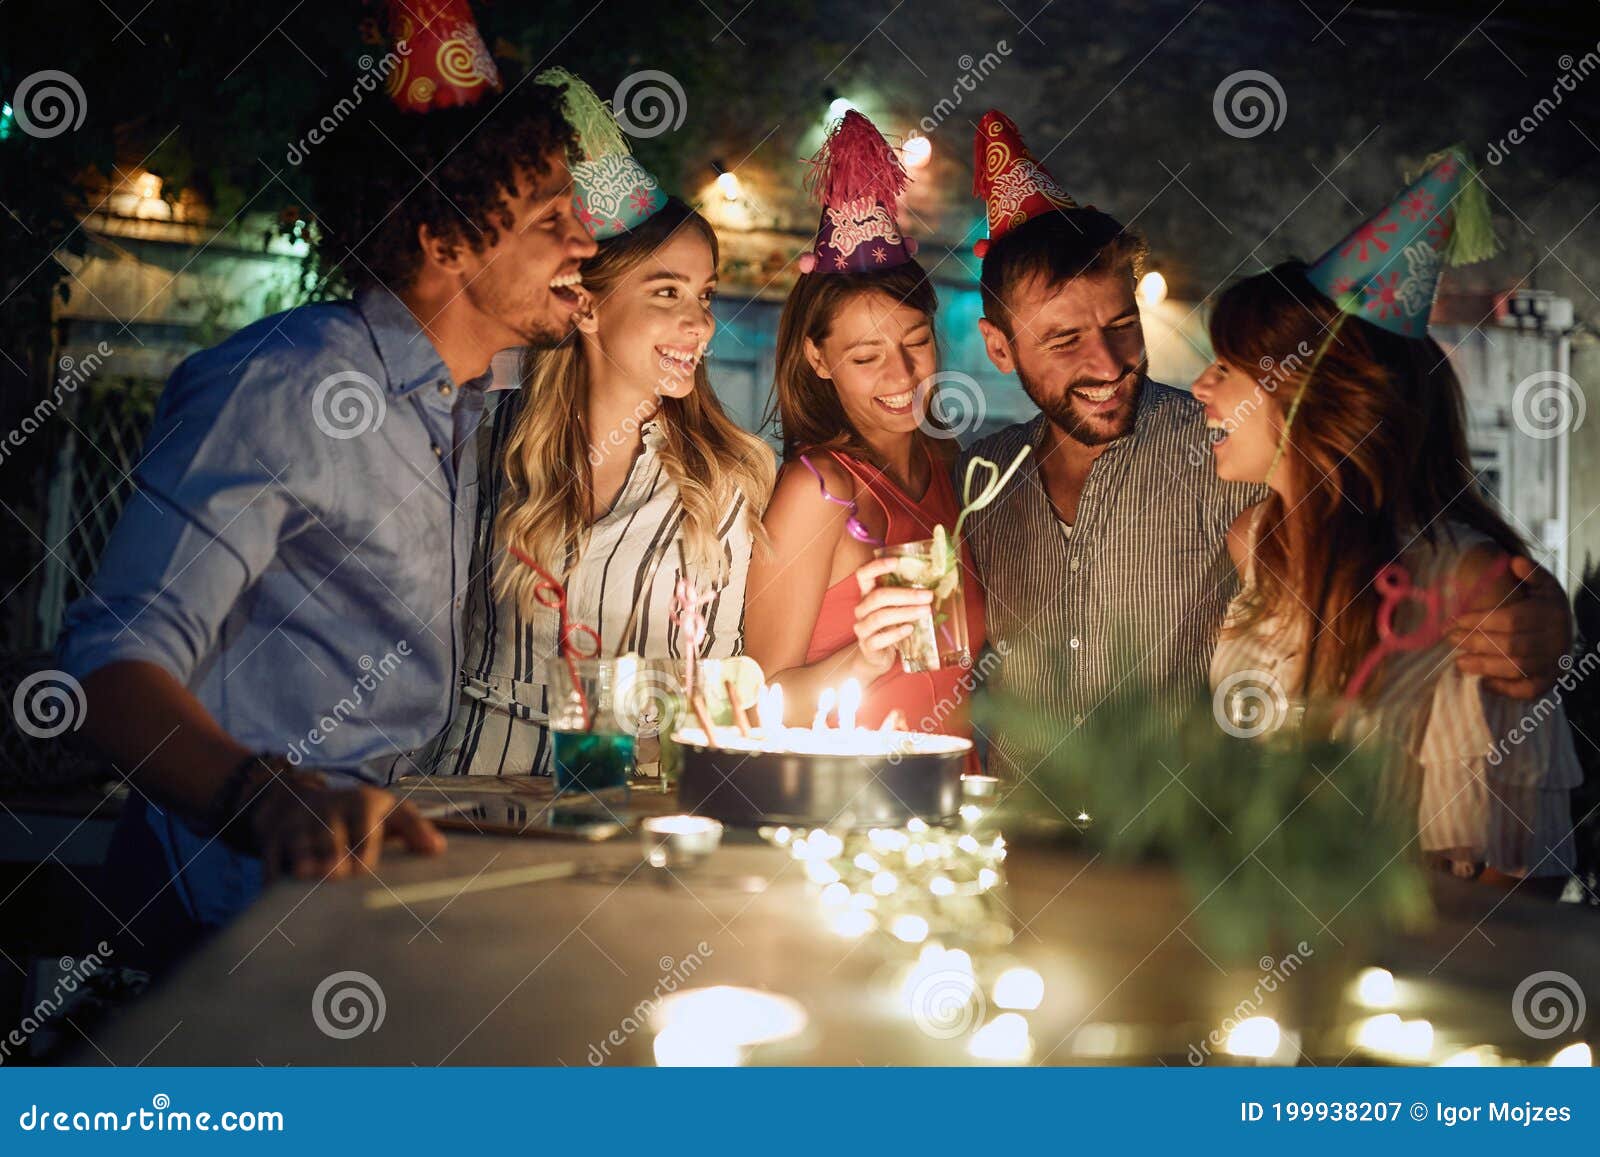 The Birthday Celebrant Enjoying with Friends at Open Air Party. Quality Time Together Stock Image - Image of adult, 199938207